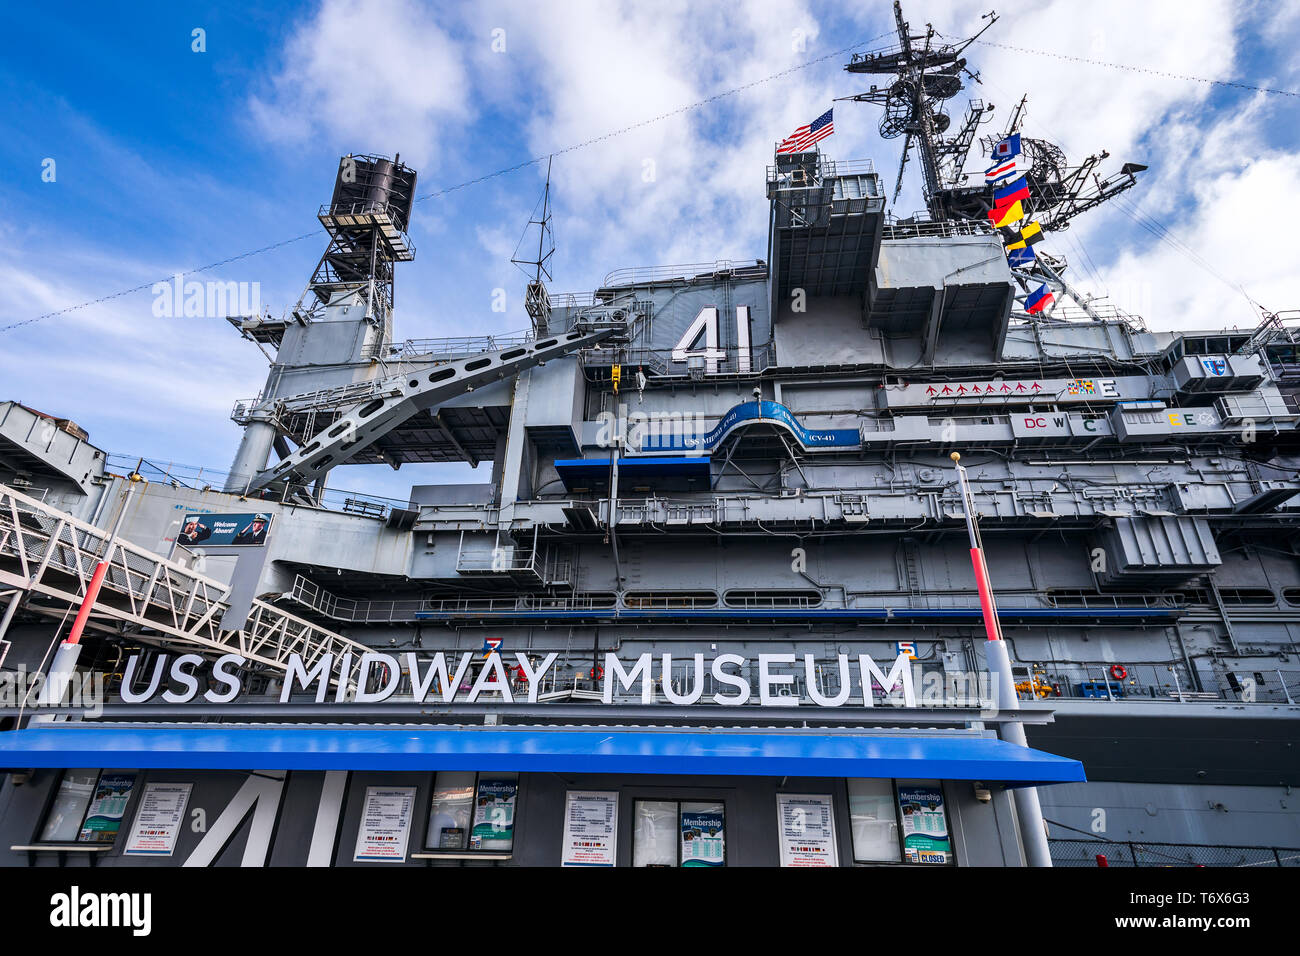 USS Midway Museum in San Diego, California, USA Stock Photo